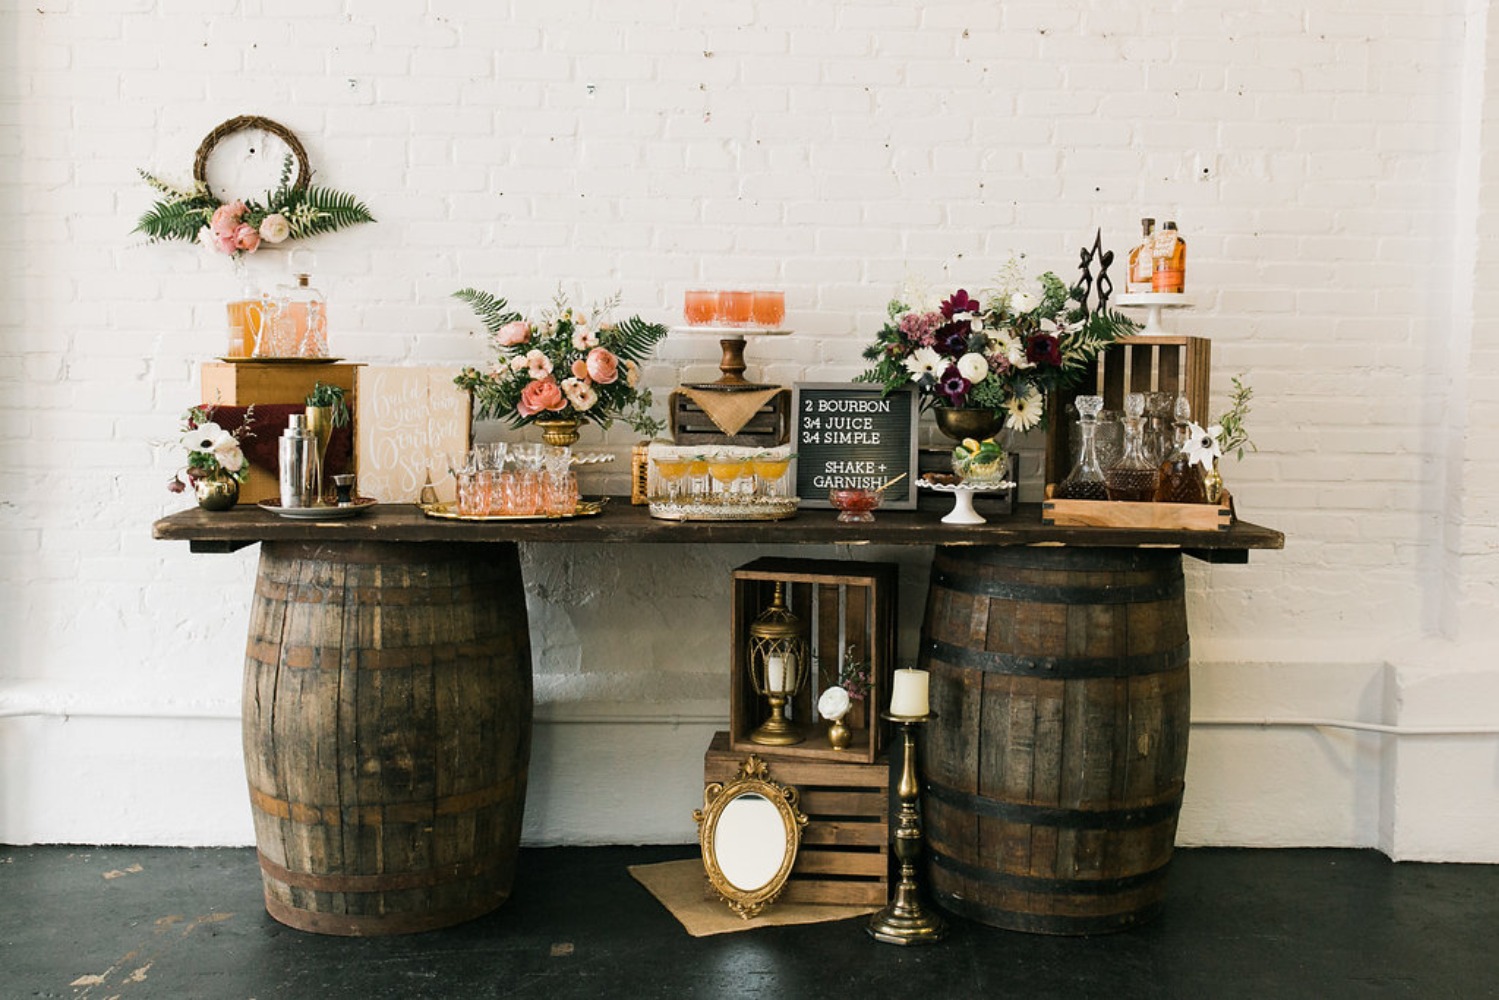 how-to-set-up-your-own-bourbon-bar